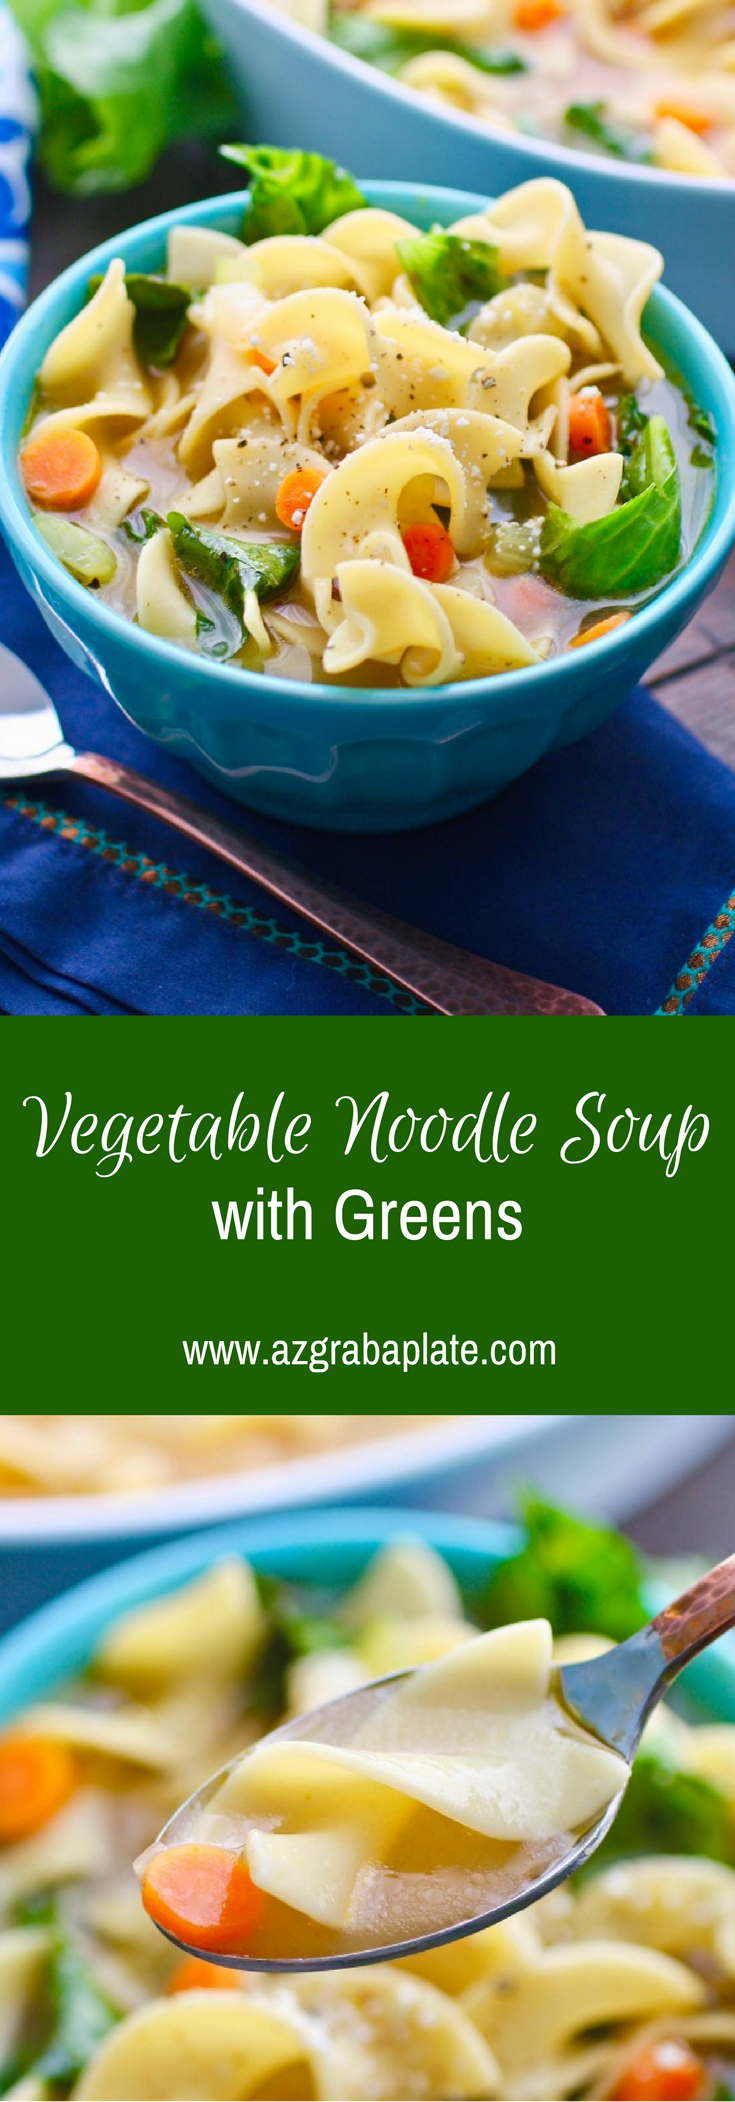 Under the weather? If you are, a bowl of Vegetable Noodle Soup with Greens can help. And if you're well, you'll still enjoy this easy-to-make, tasty soup!